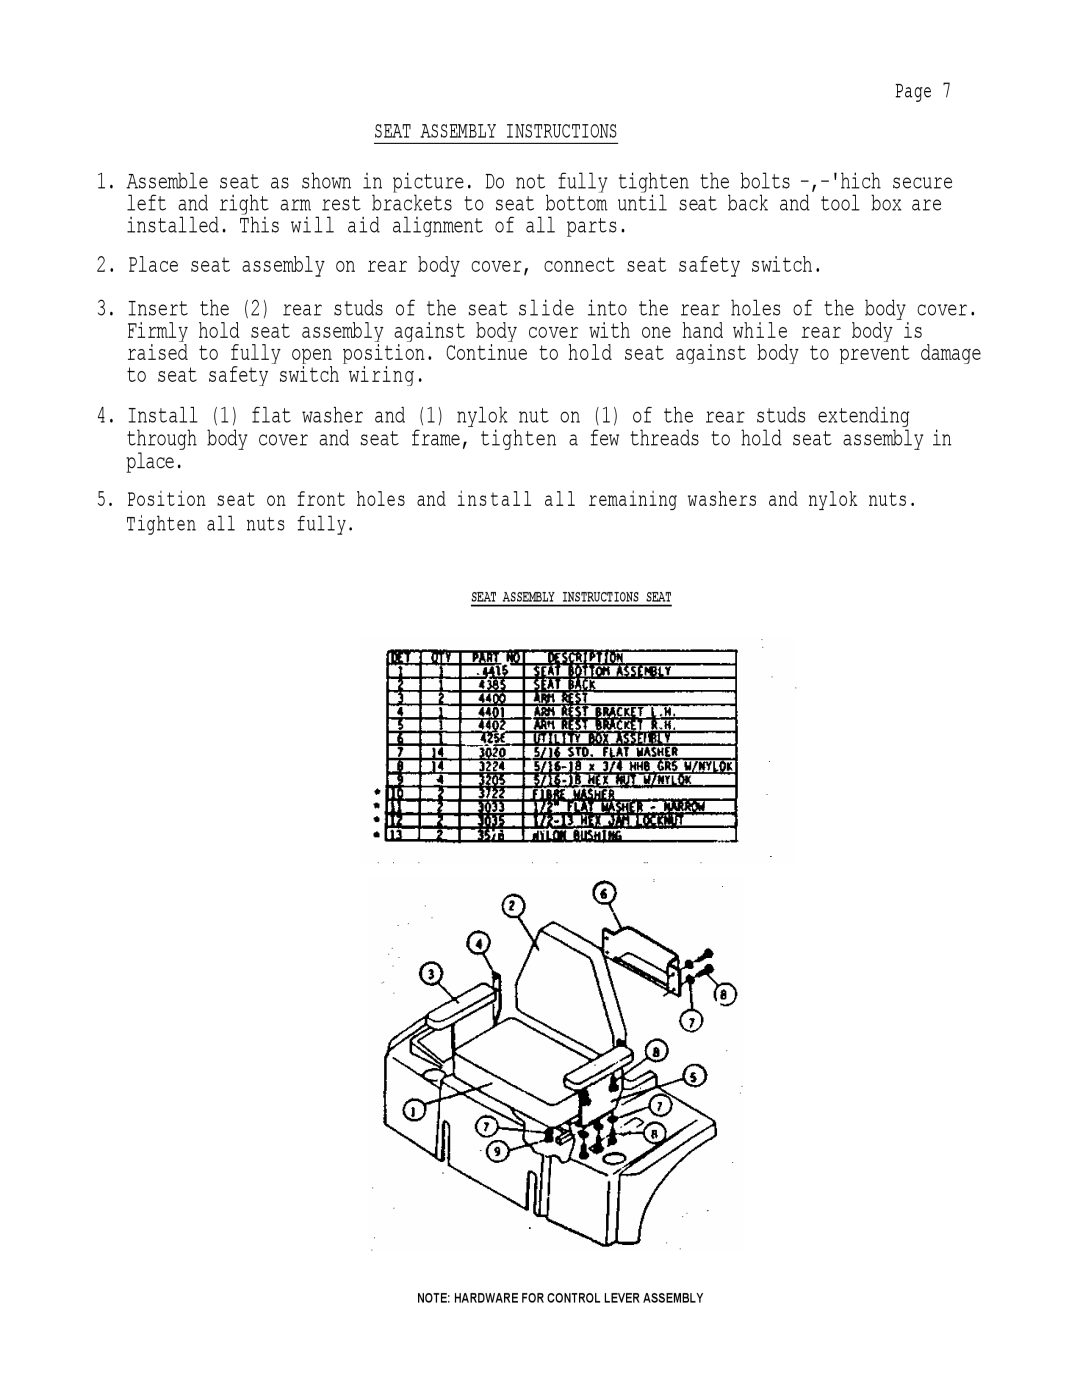 Dixon 503 manual Page SEAT ASSEMBLY INSTRUCTIONS, Seat Assembly Instructions Seat, Note Hardware For Control Lever Assembly 